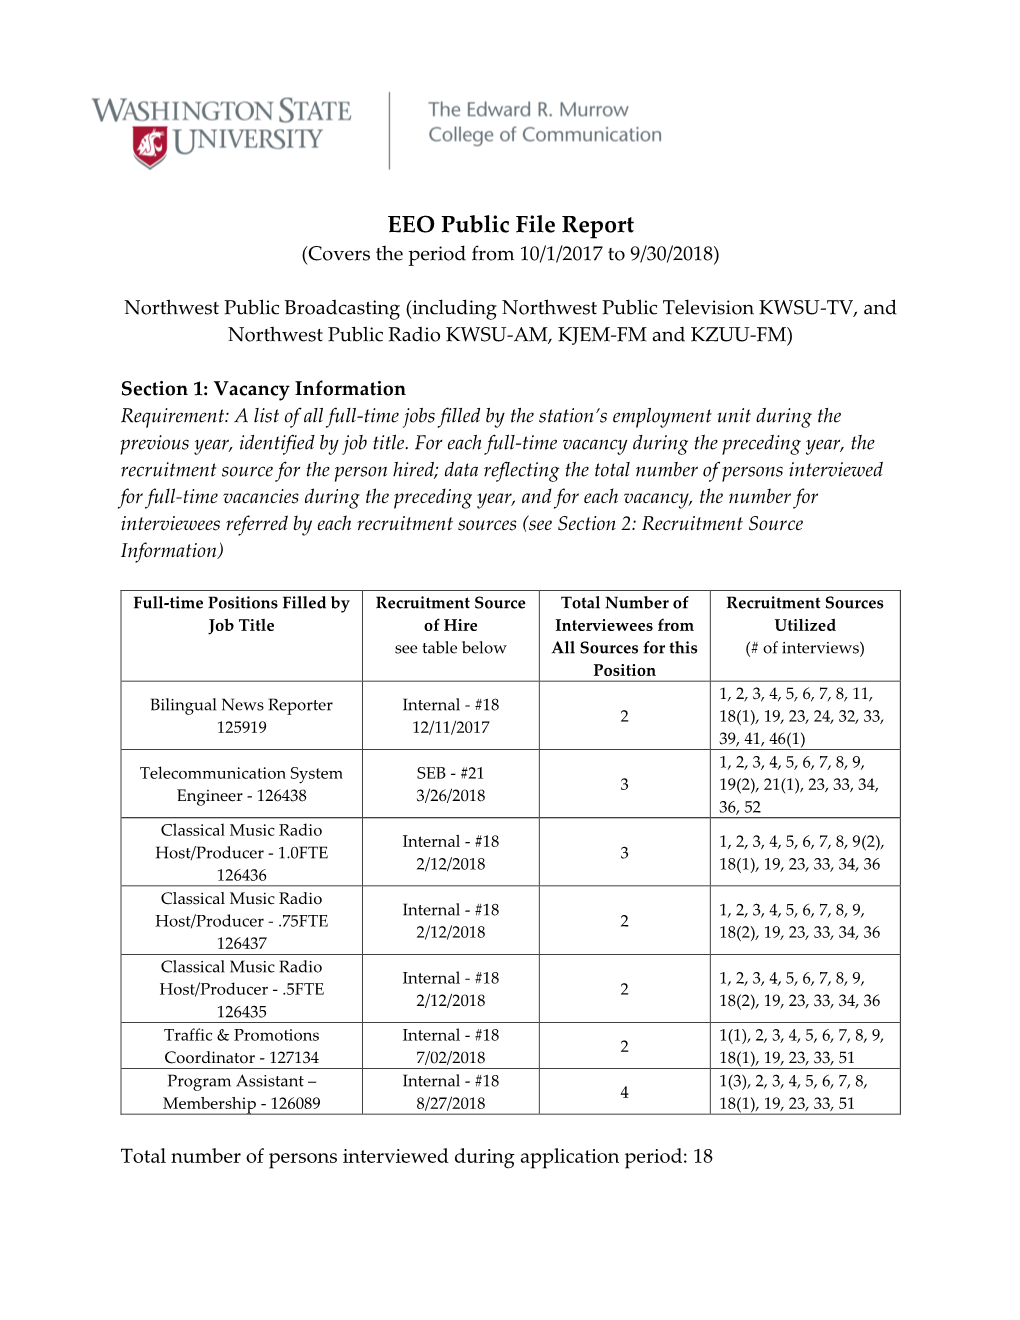 EEO Public File Report (Covers the Period from 10/1/2017 to 9/30/2018)